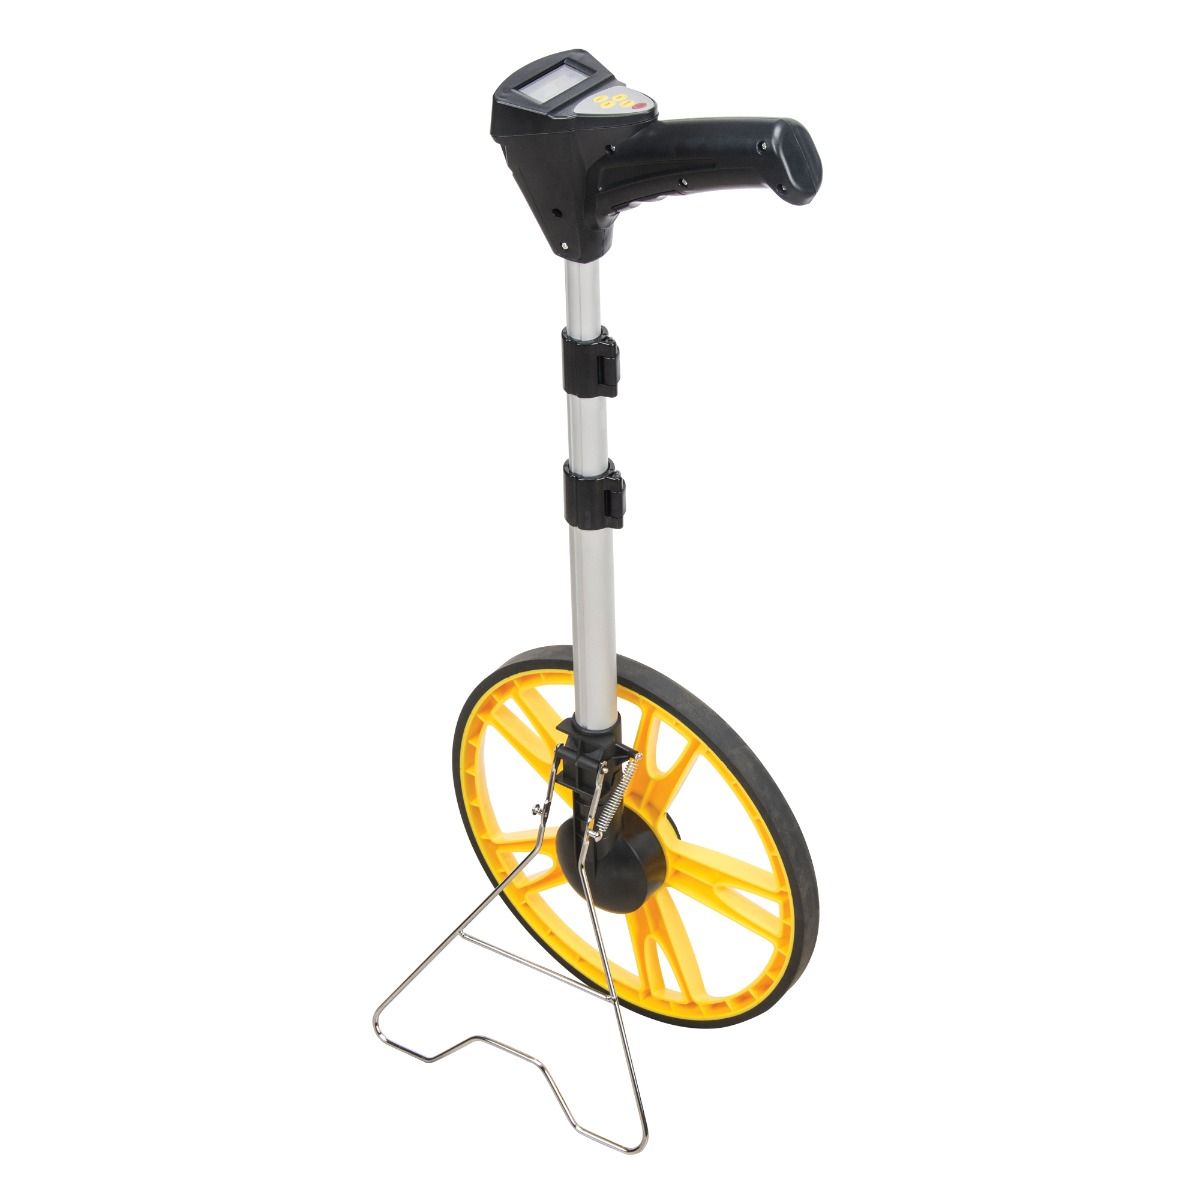 Measuring wheel - Large wheel model ensures accuracy and is ideal for uneven terrain
